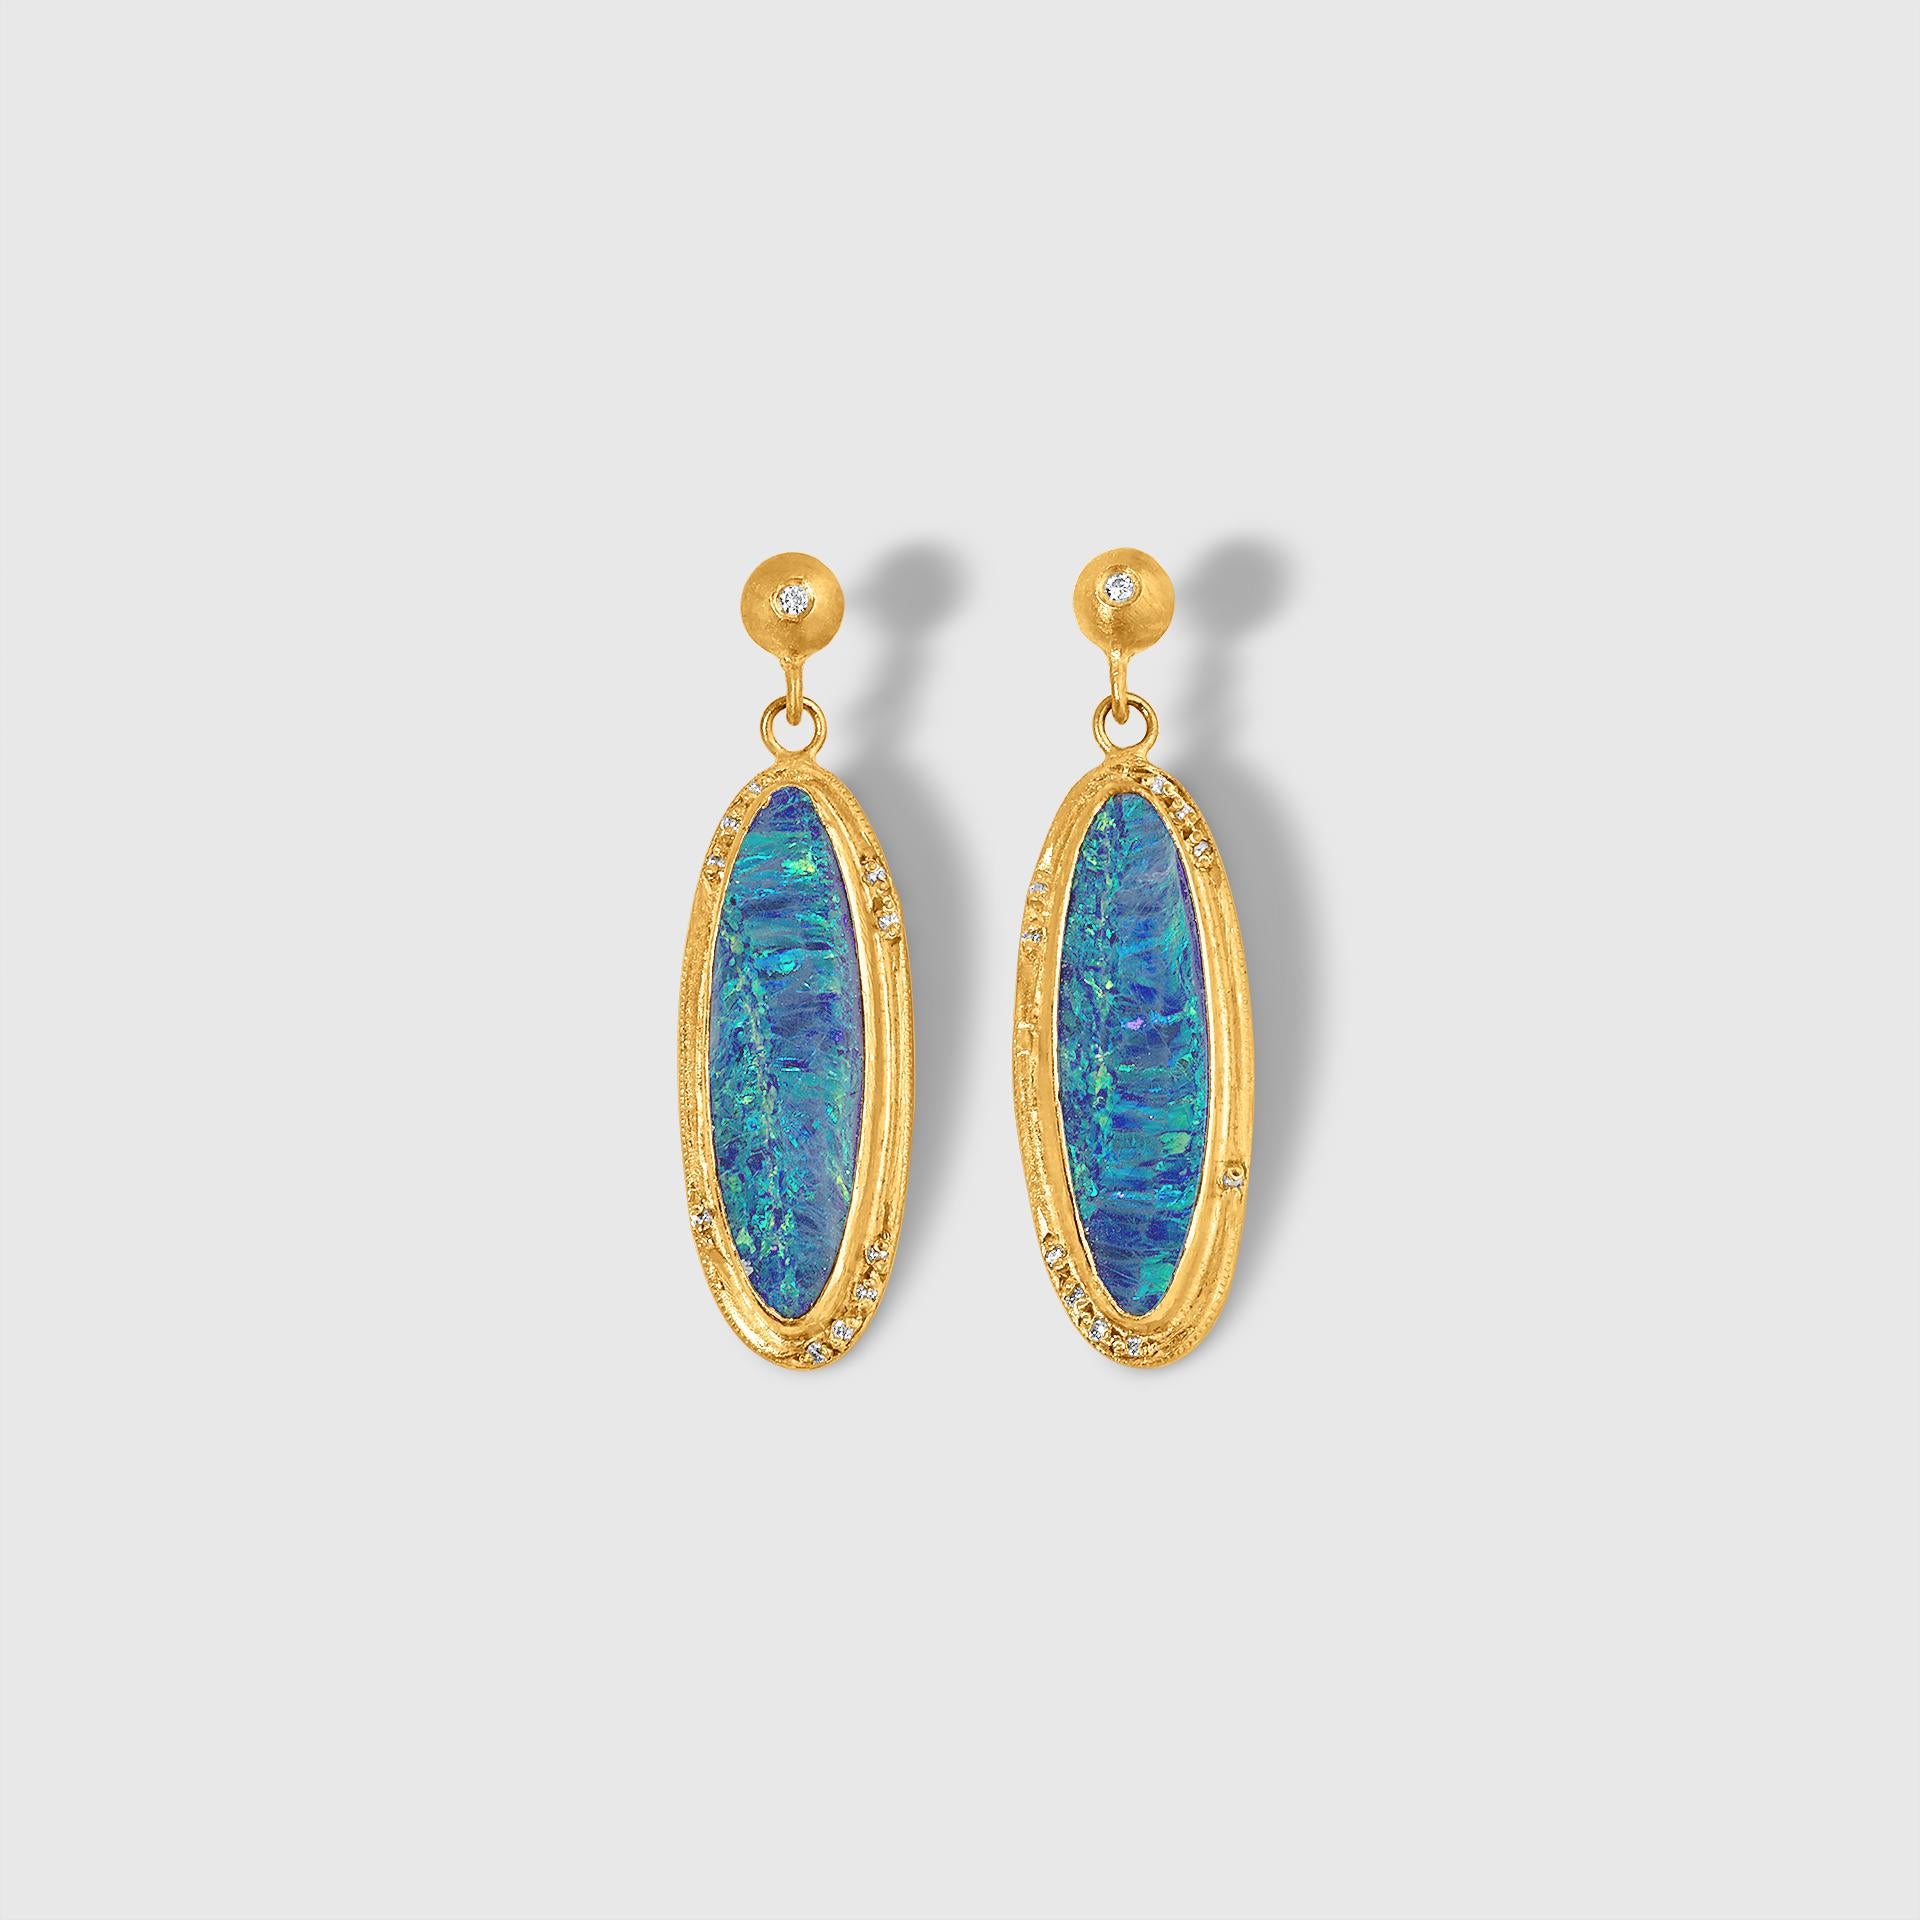 Doublet Opal Earrings with Diamonds, 24kt Solid Yellow Gold, Opals: 9.26ct, Size Medium, Length: 1 1/2